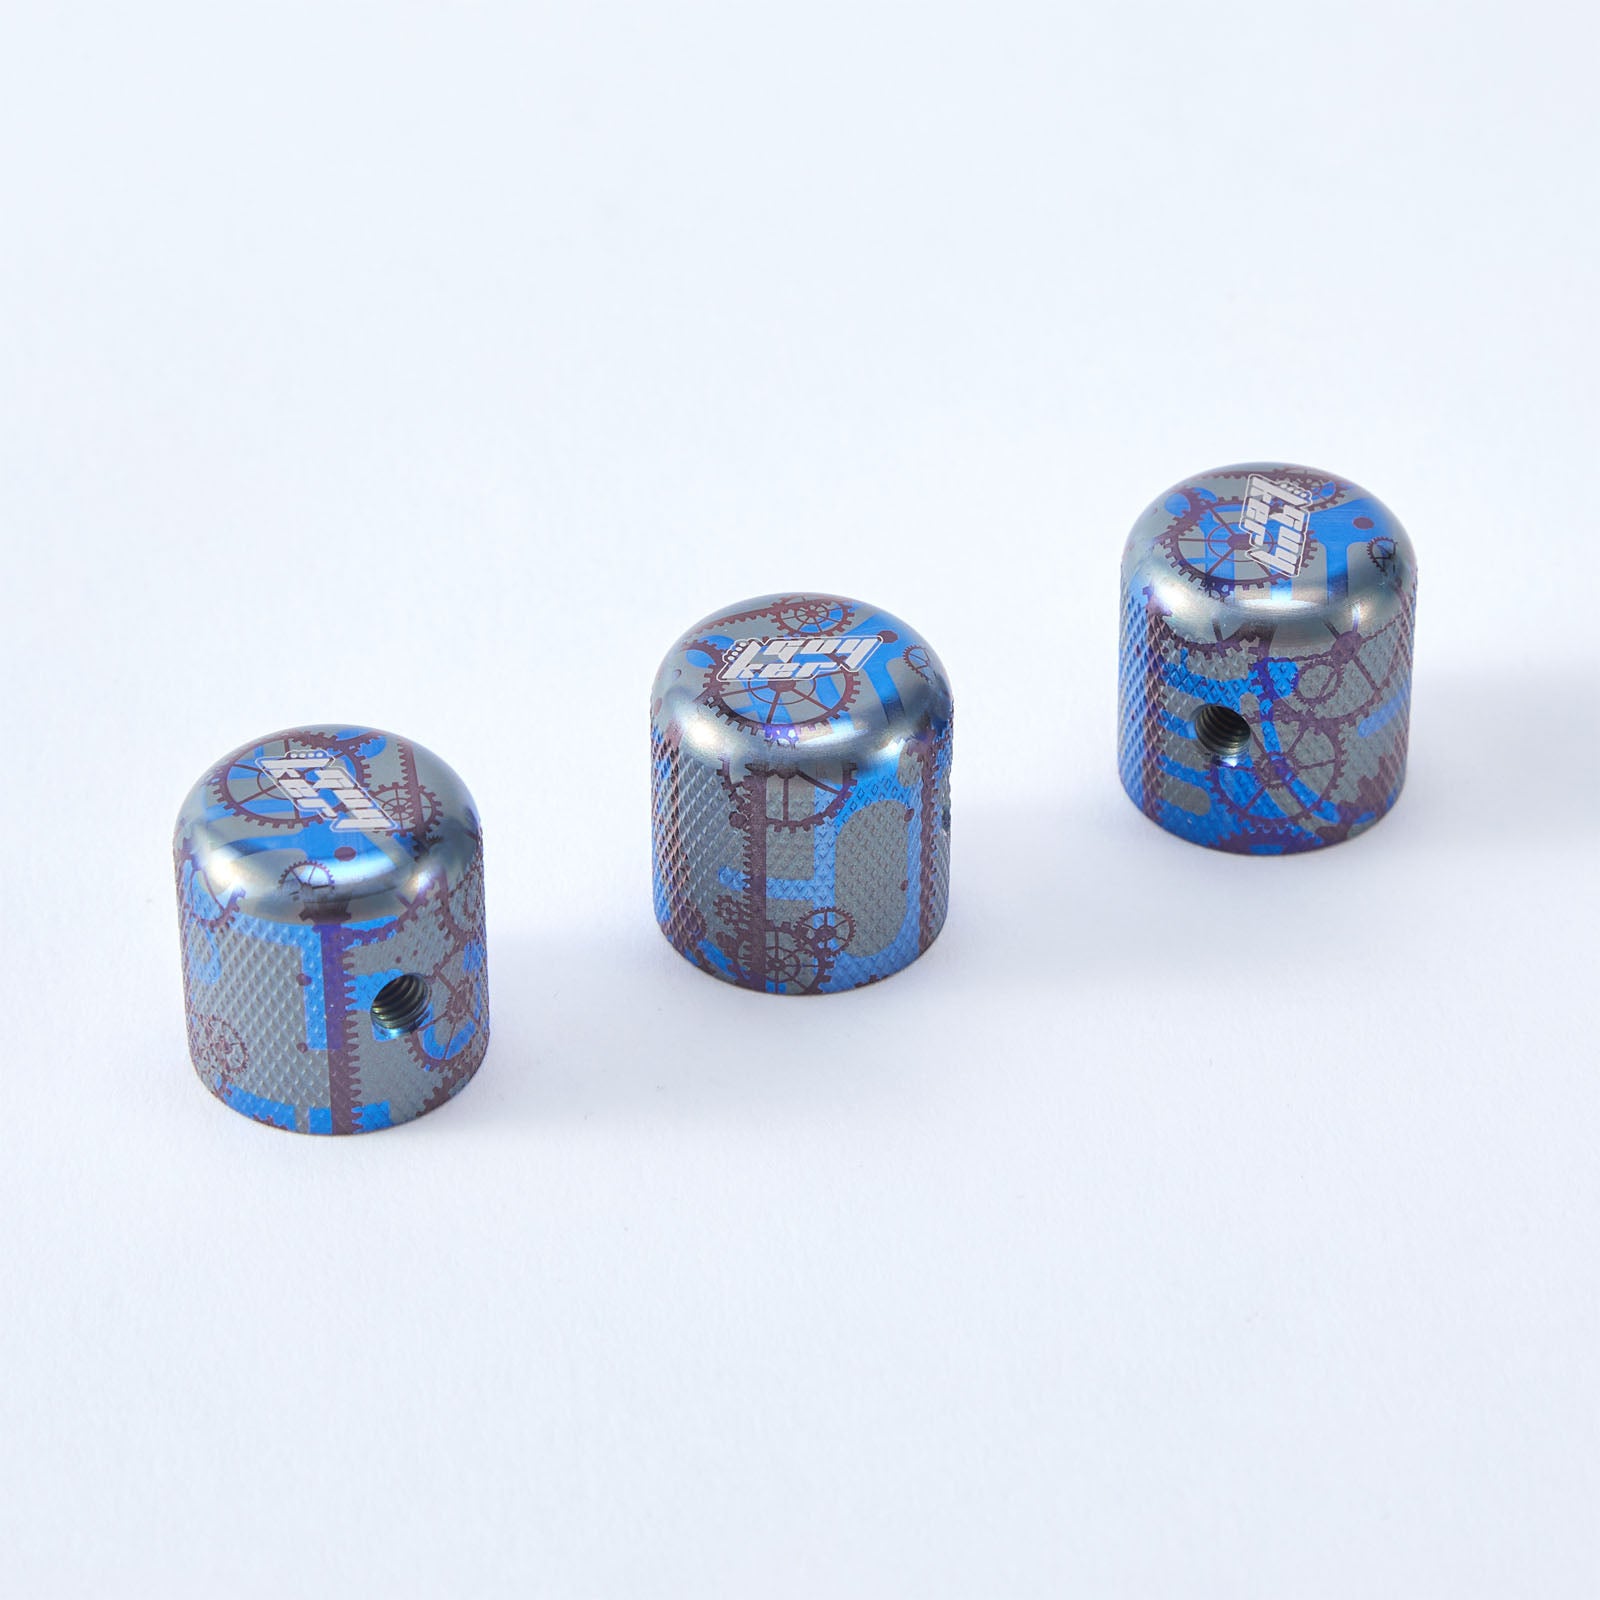 NS005-TI-Titanium Alloy Control Plate Knob Mechanical Pattern for Fend TL Parts Replacement